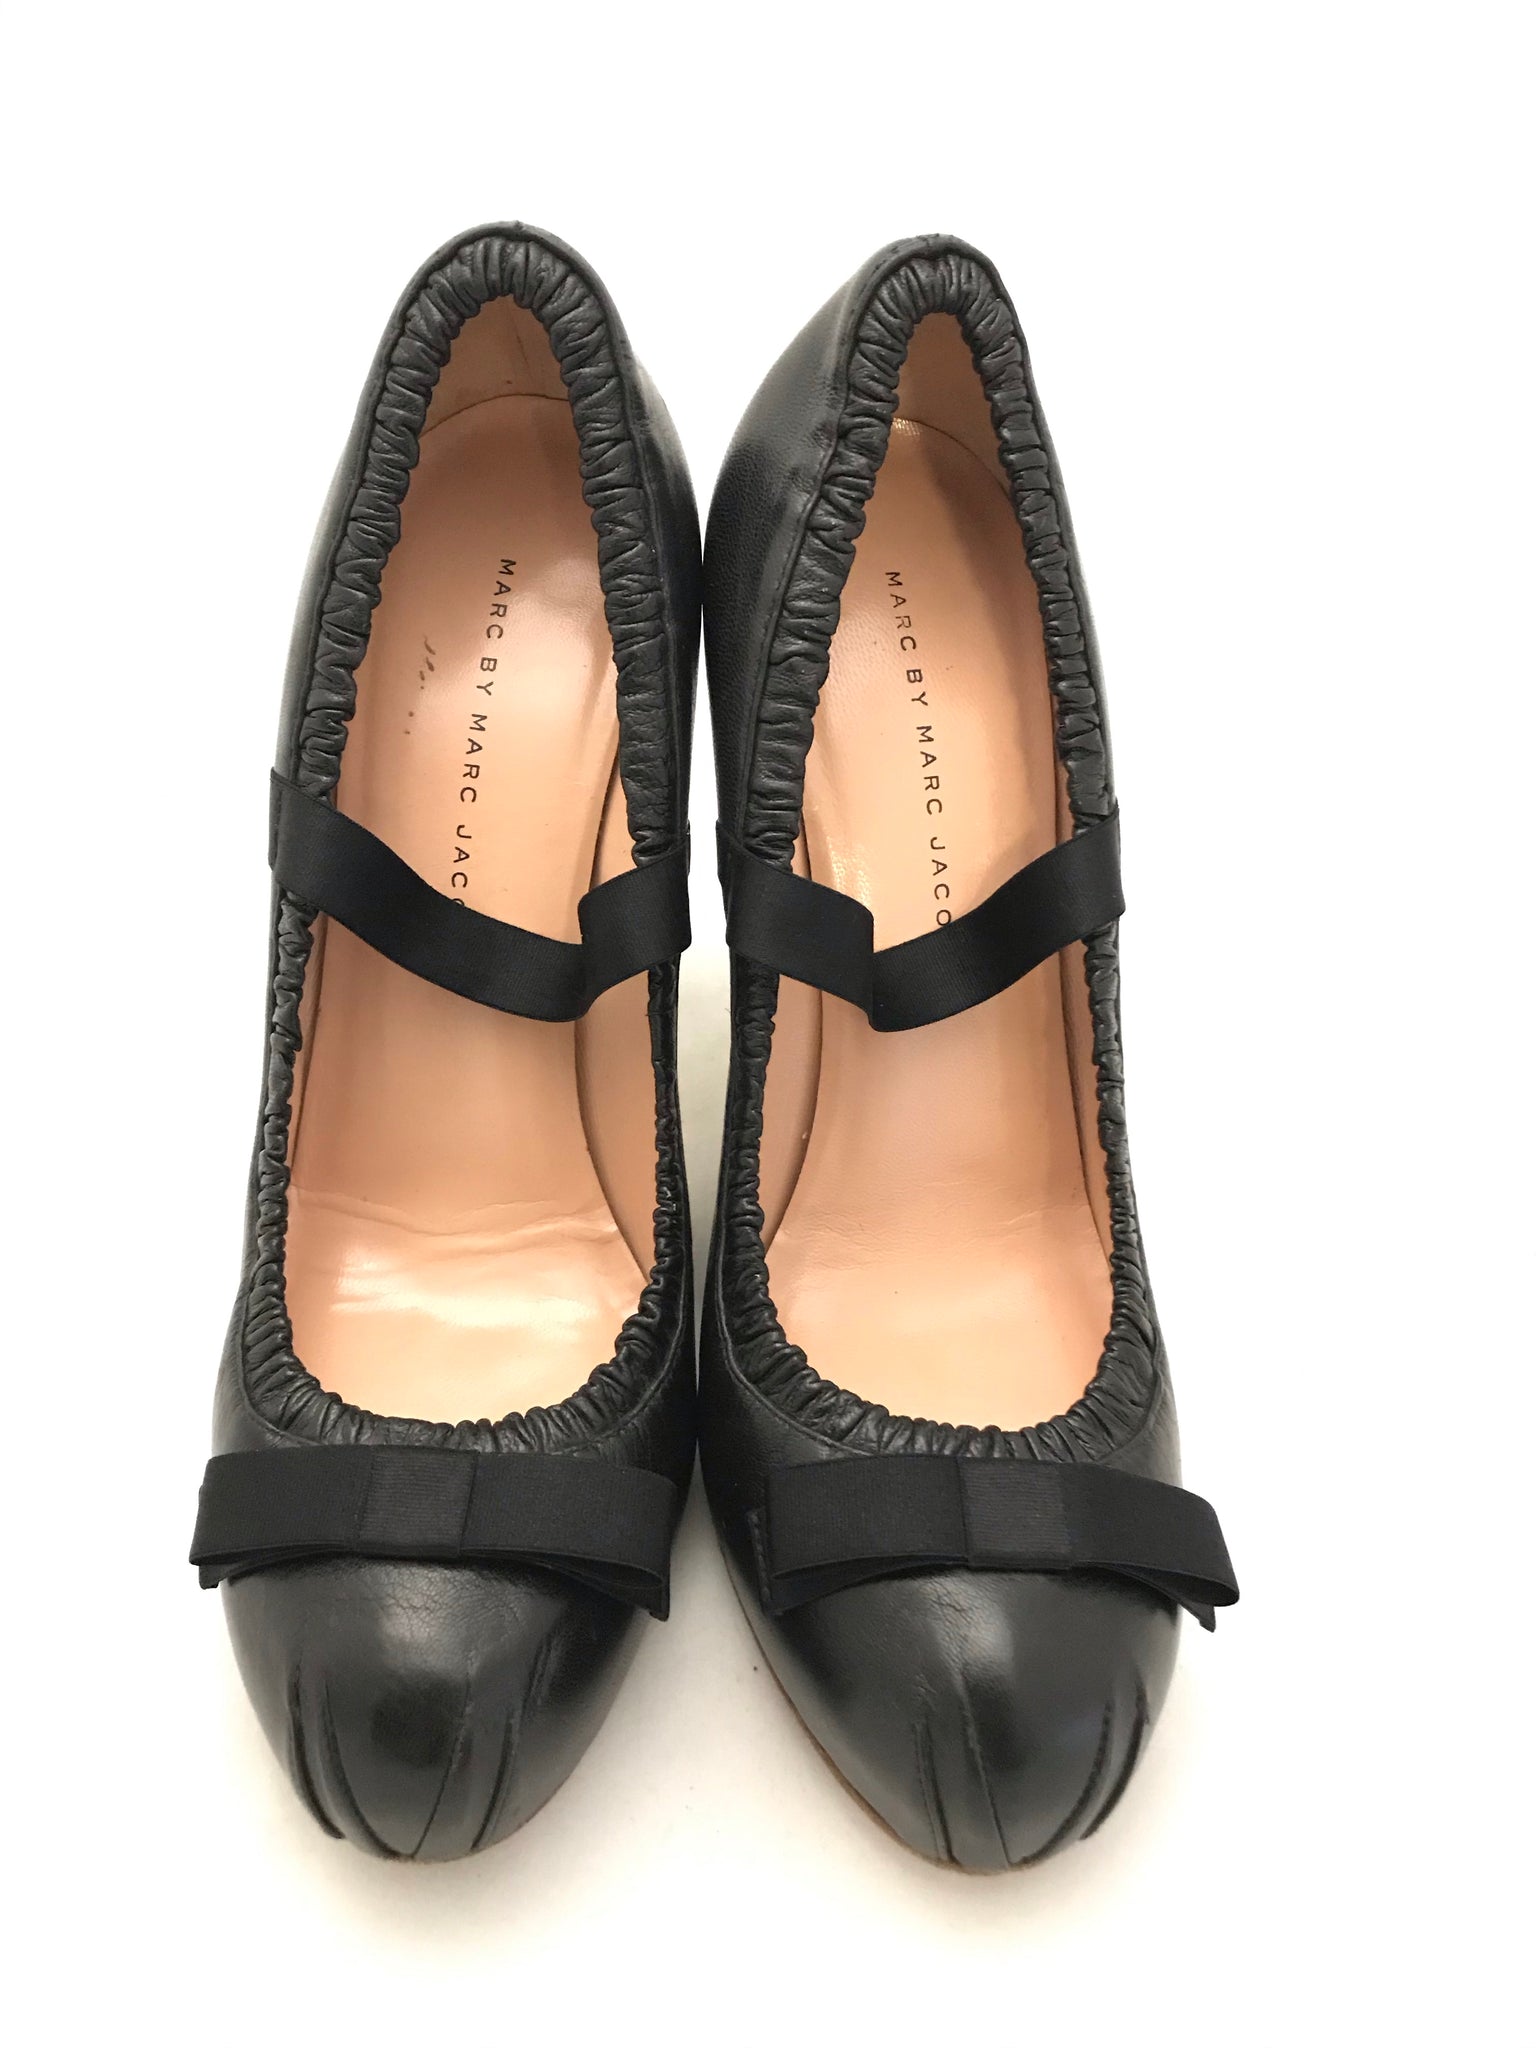 Isabella's Wardrobe Marc by Marc Jacobs Bow Detail Heels.